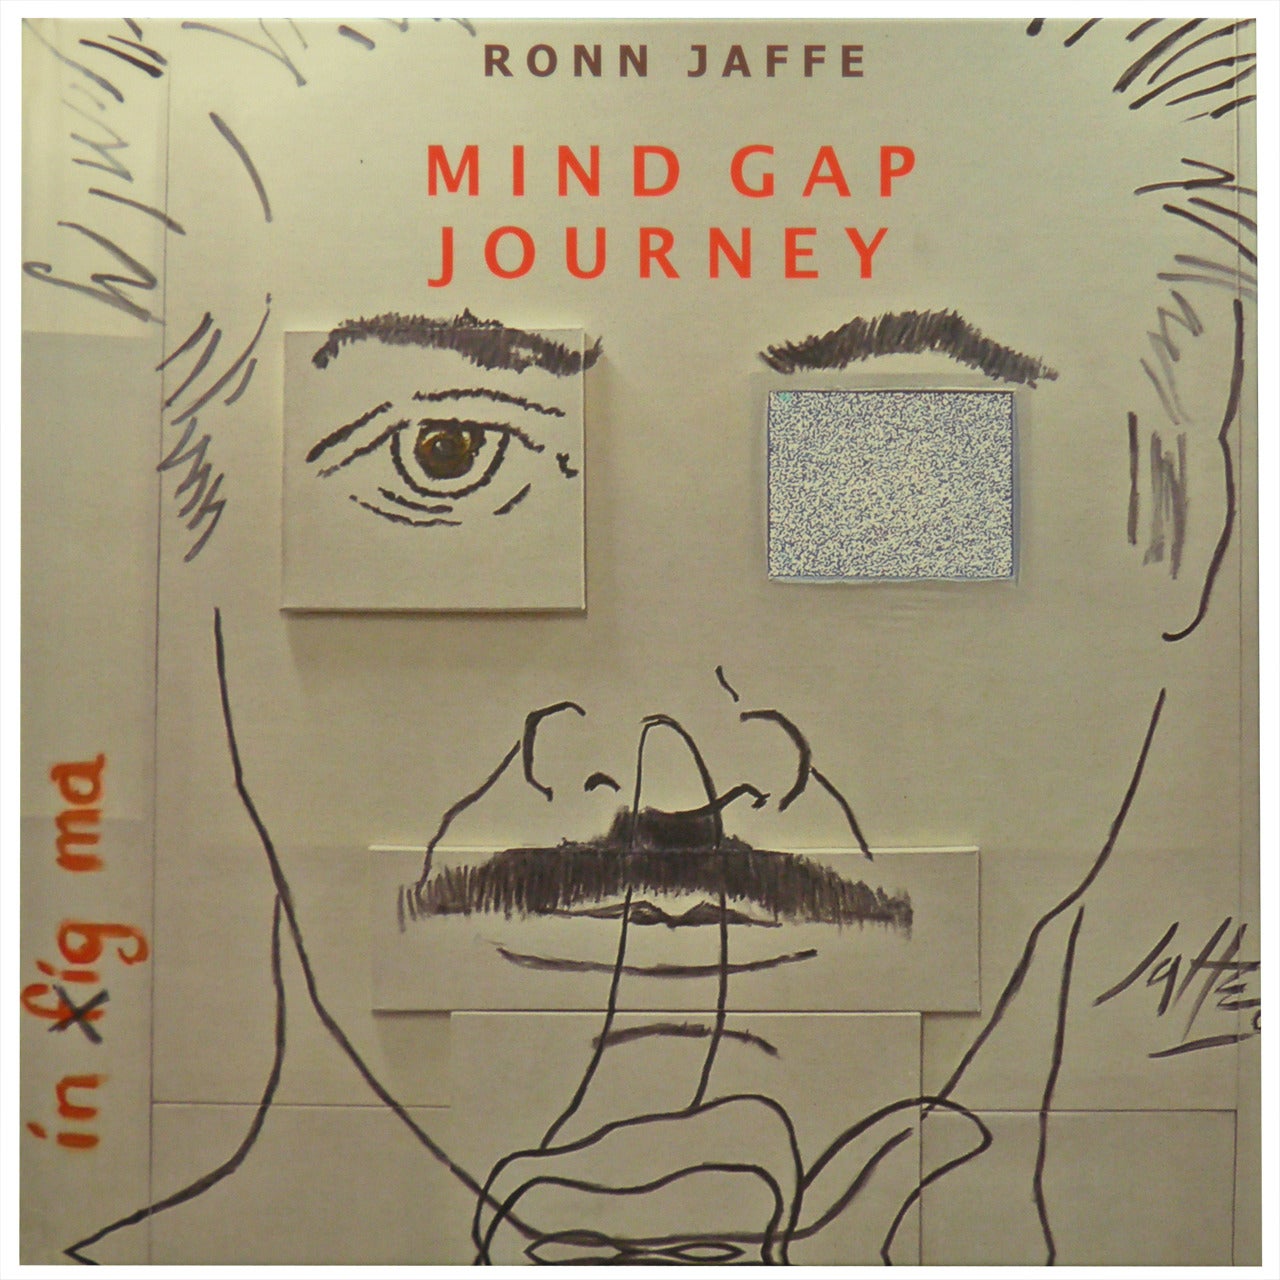 Noted Cutting Edge Artist Ronn Jaffe's New Monograph, 'Mind Gap Journey' For Sale